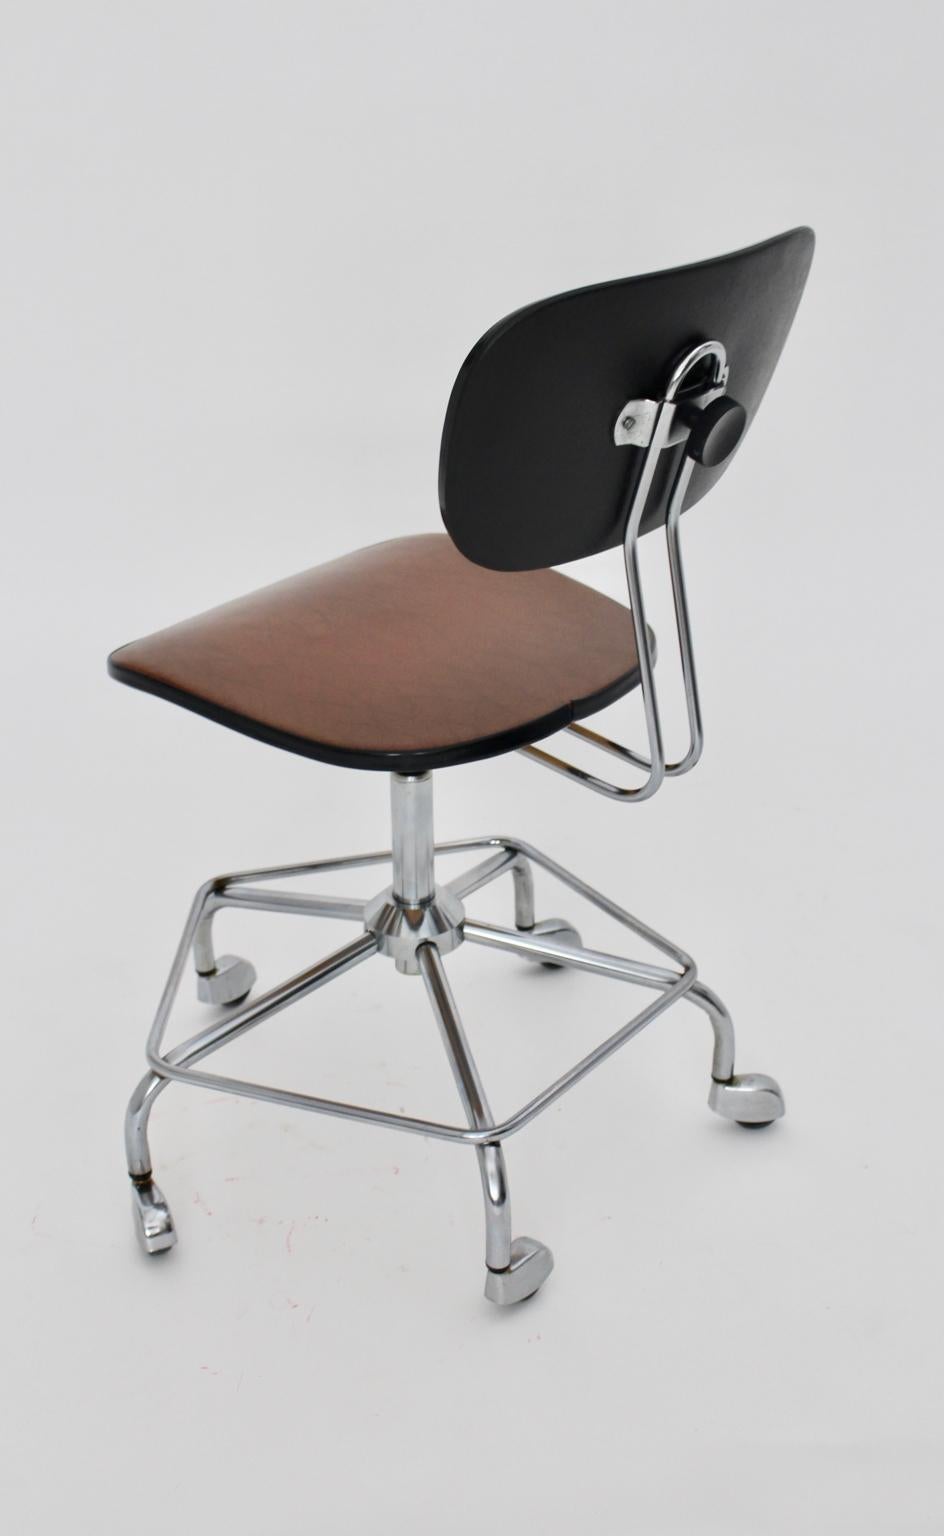 Mid-Century Modern Vintage Desk Chair Attributed to Egon Eiermann, 1950, Germany For Sale 6